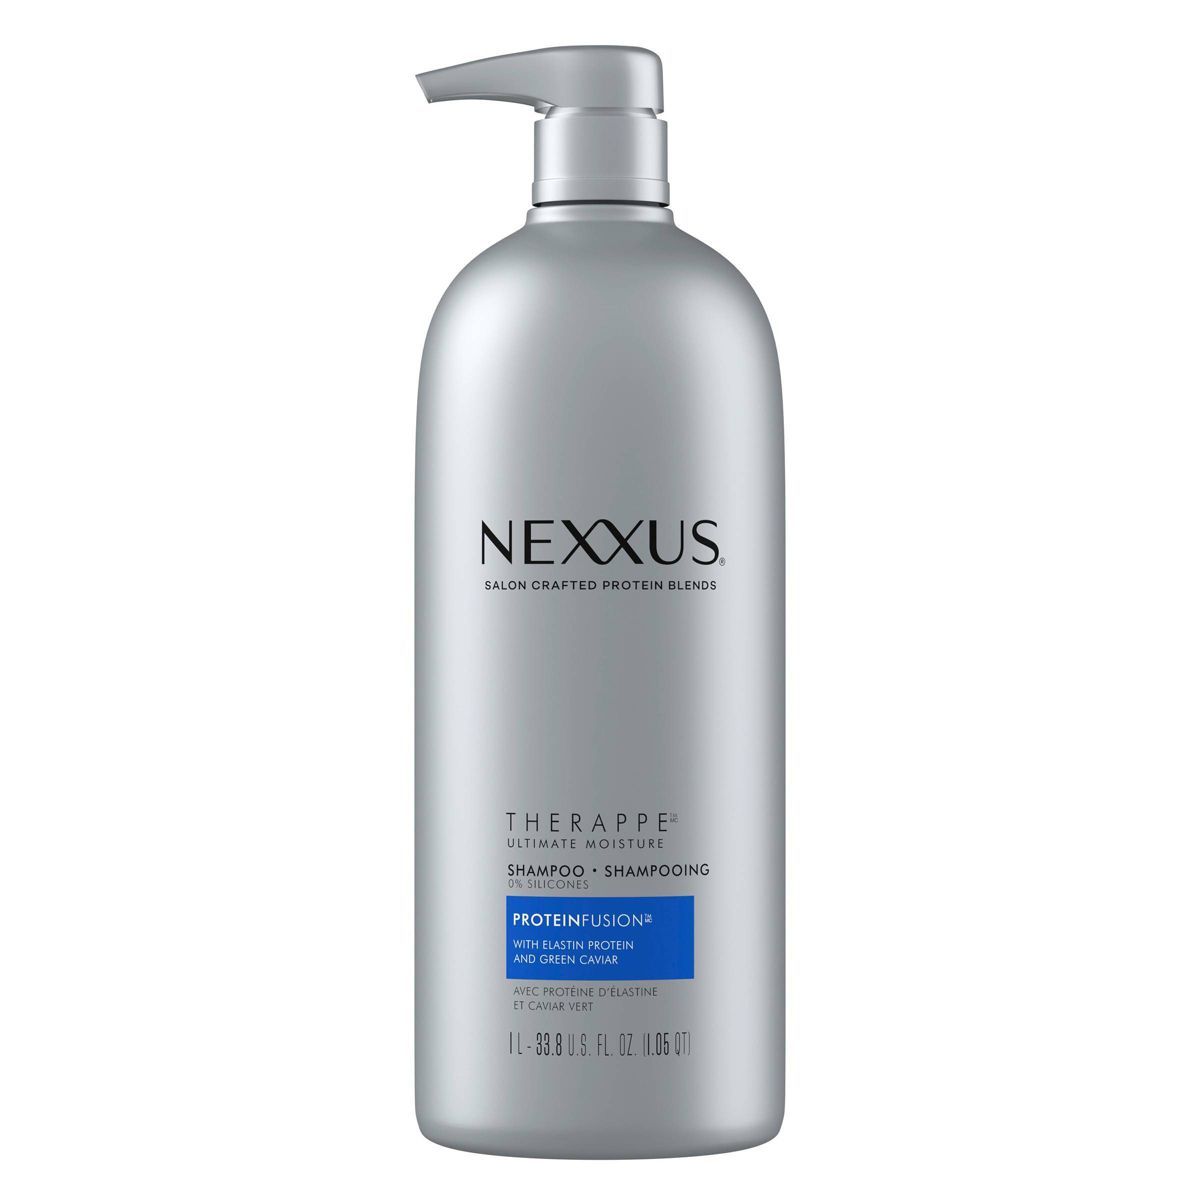 Nexxus Therappe Ultimate Moisture Silicone Free Shampoo | Target